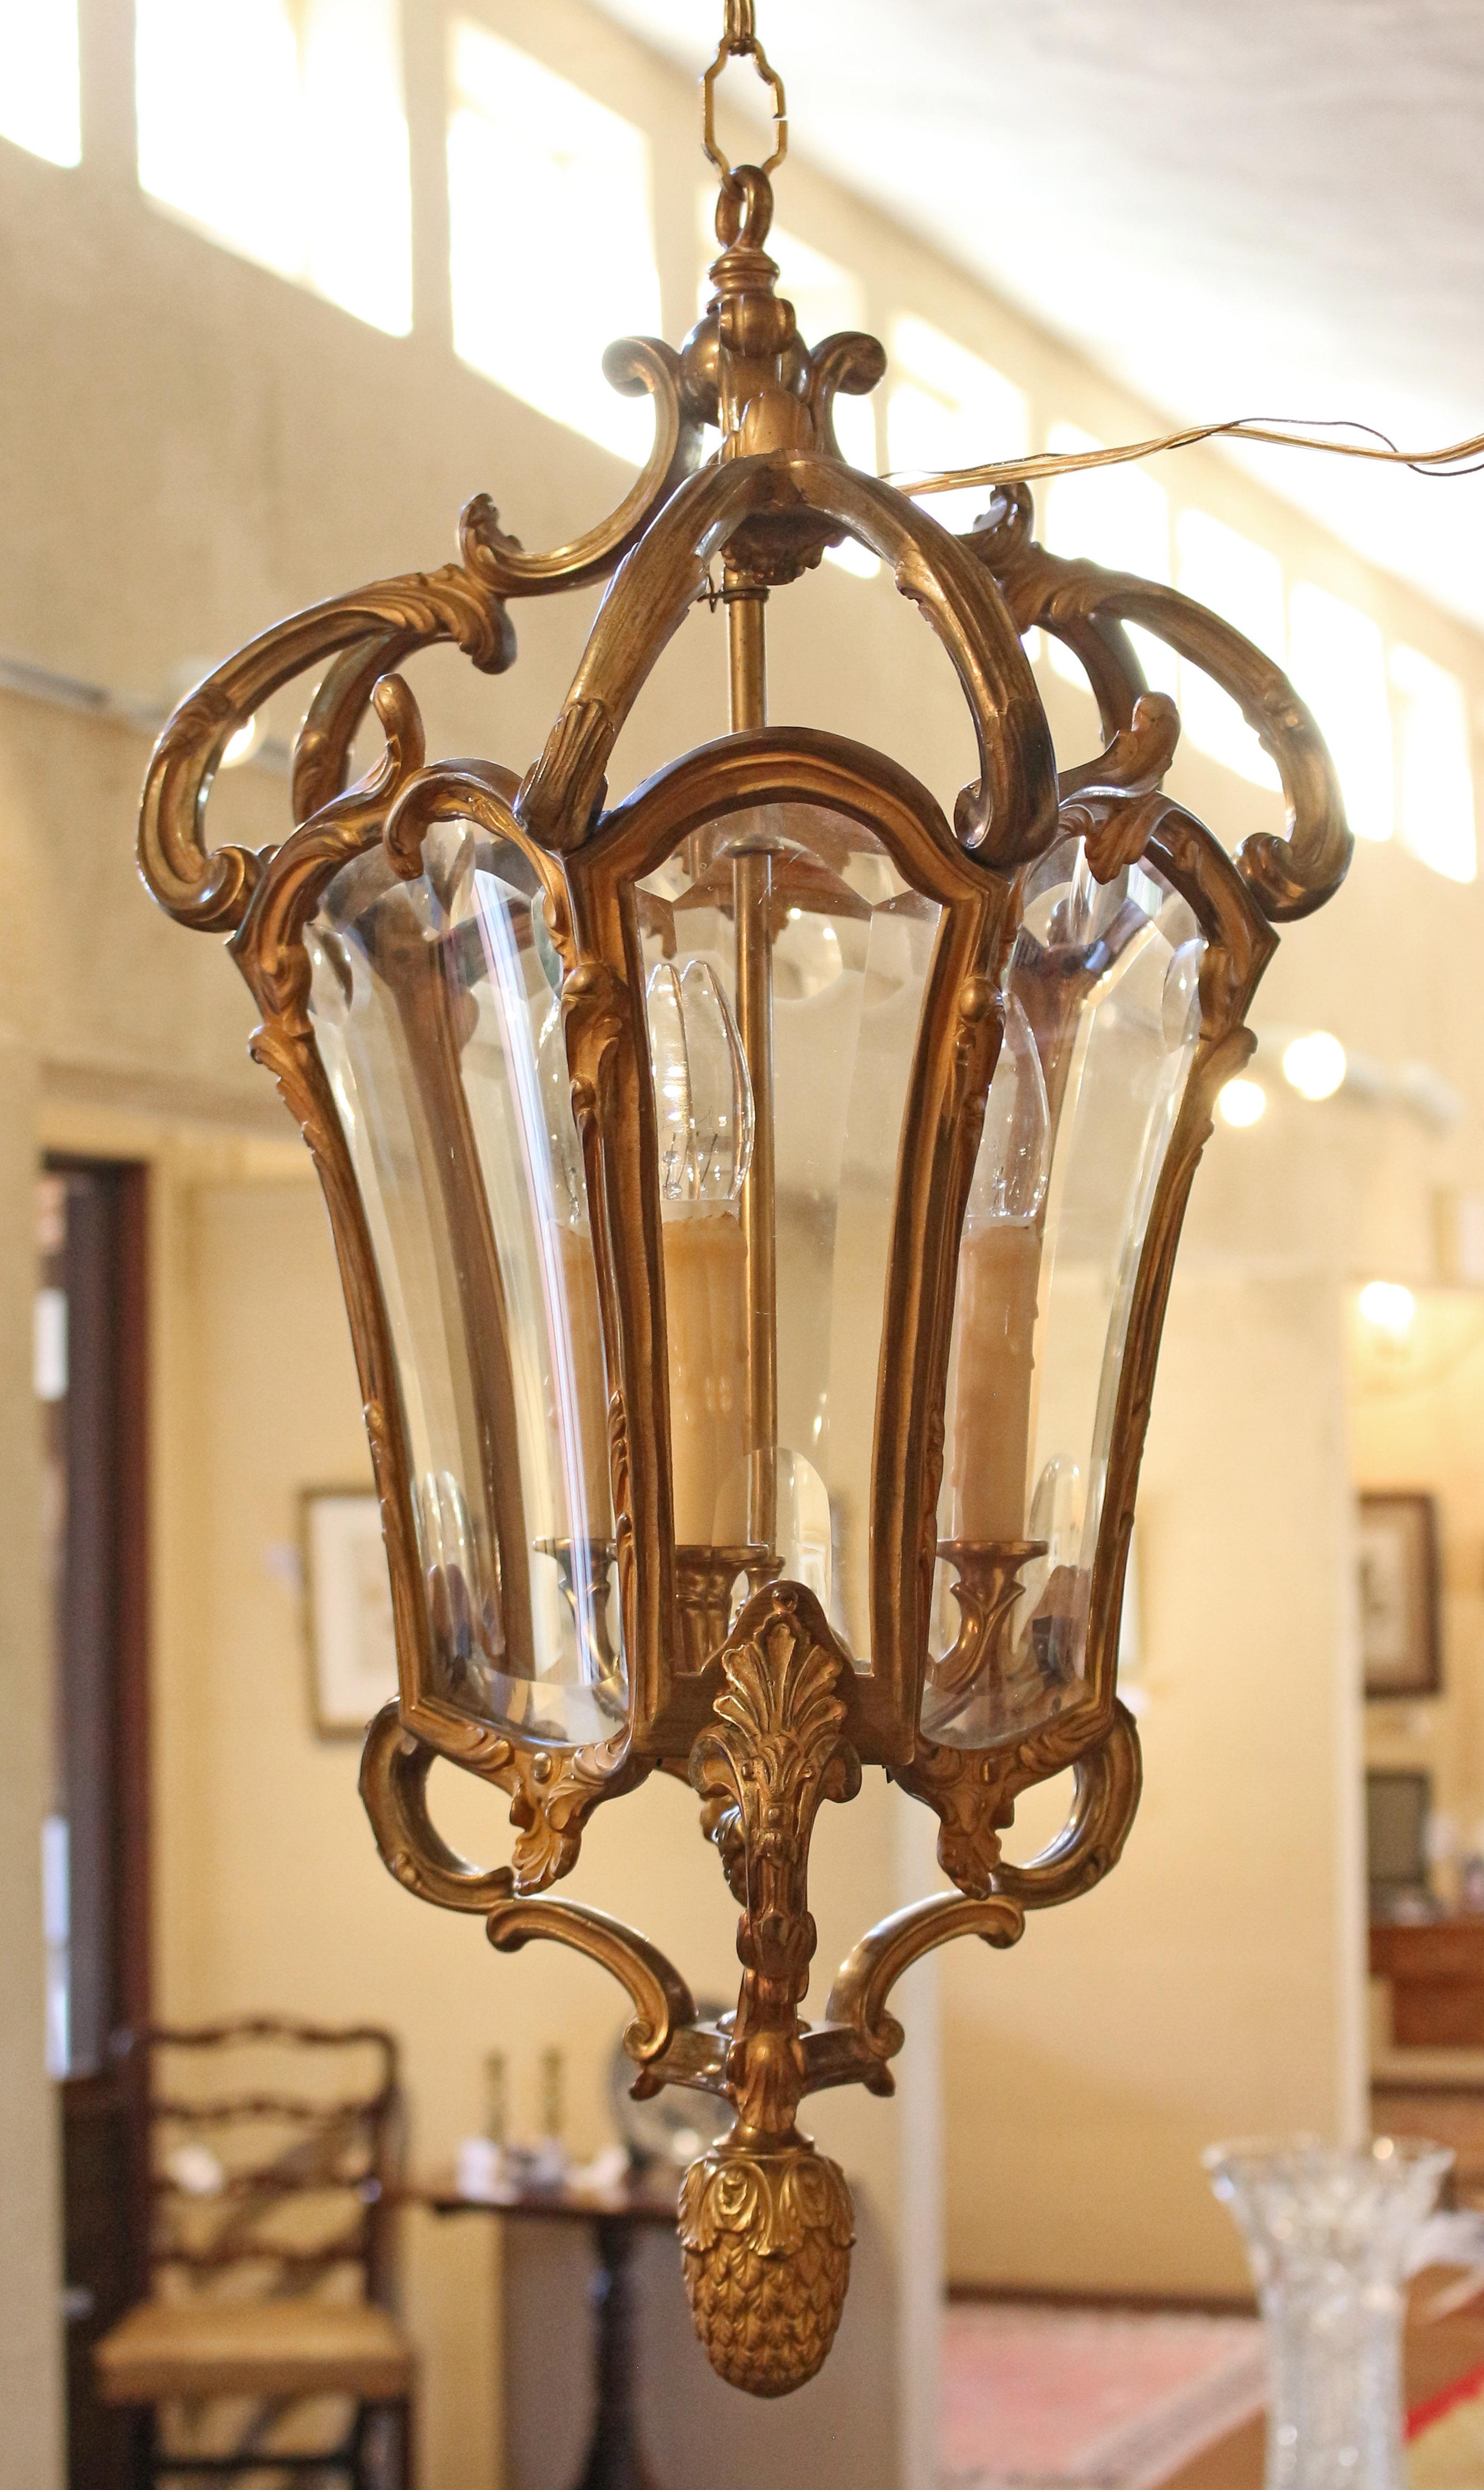 Early 20th Century French Gilt Bronze & Glass Hall Lantern For Sale 6